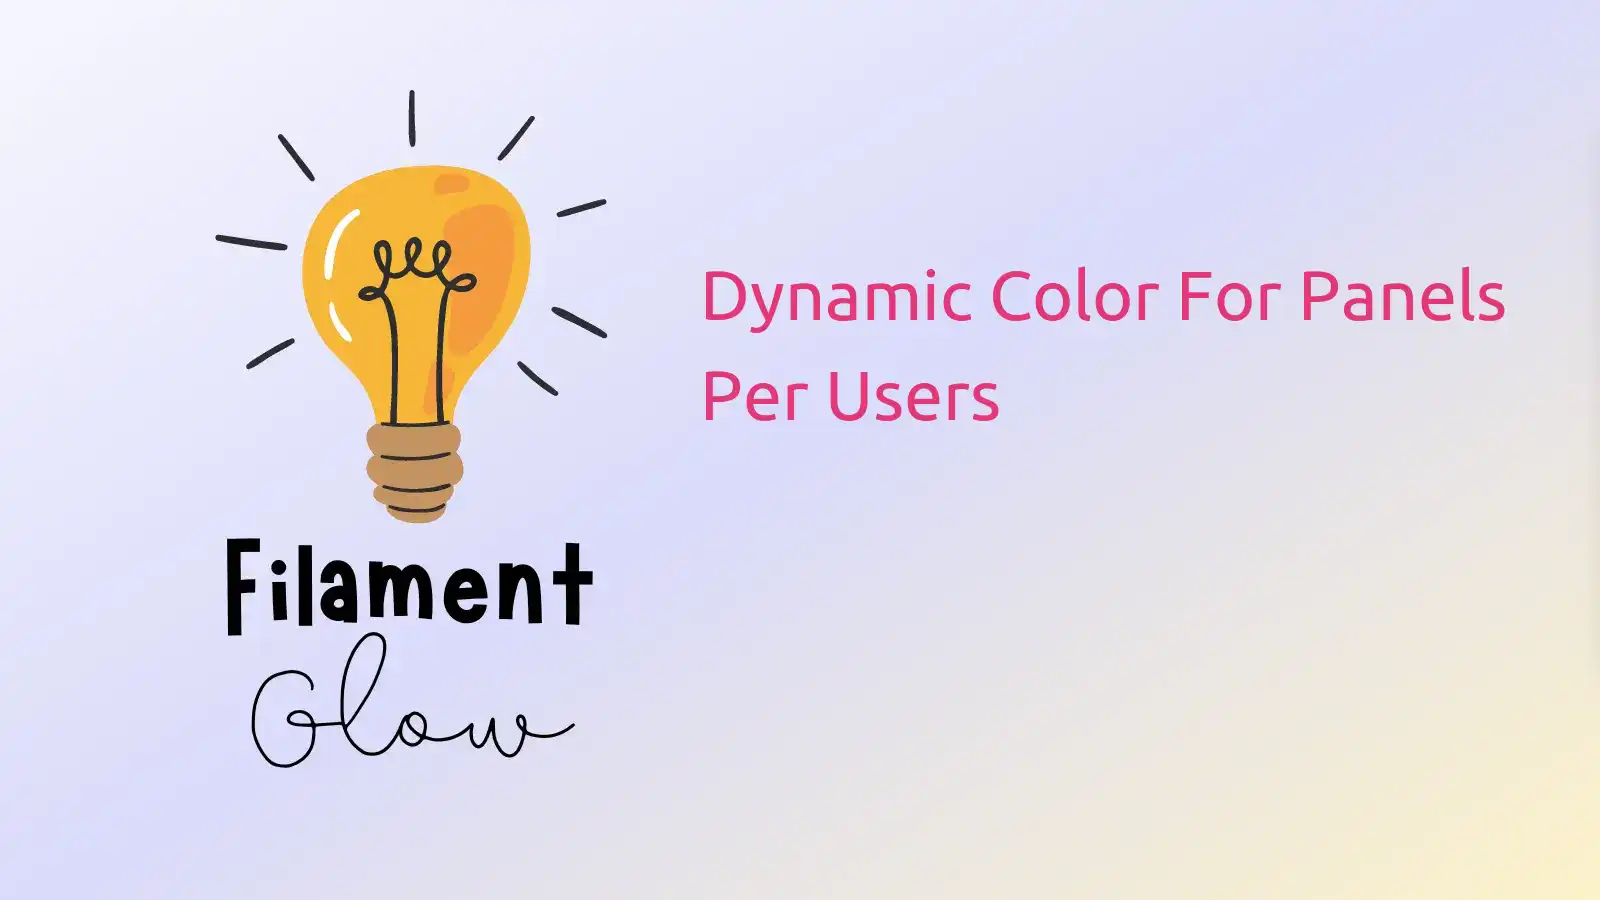 Dynamic Color For Panels Per Users